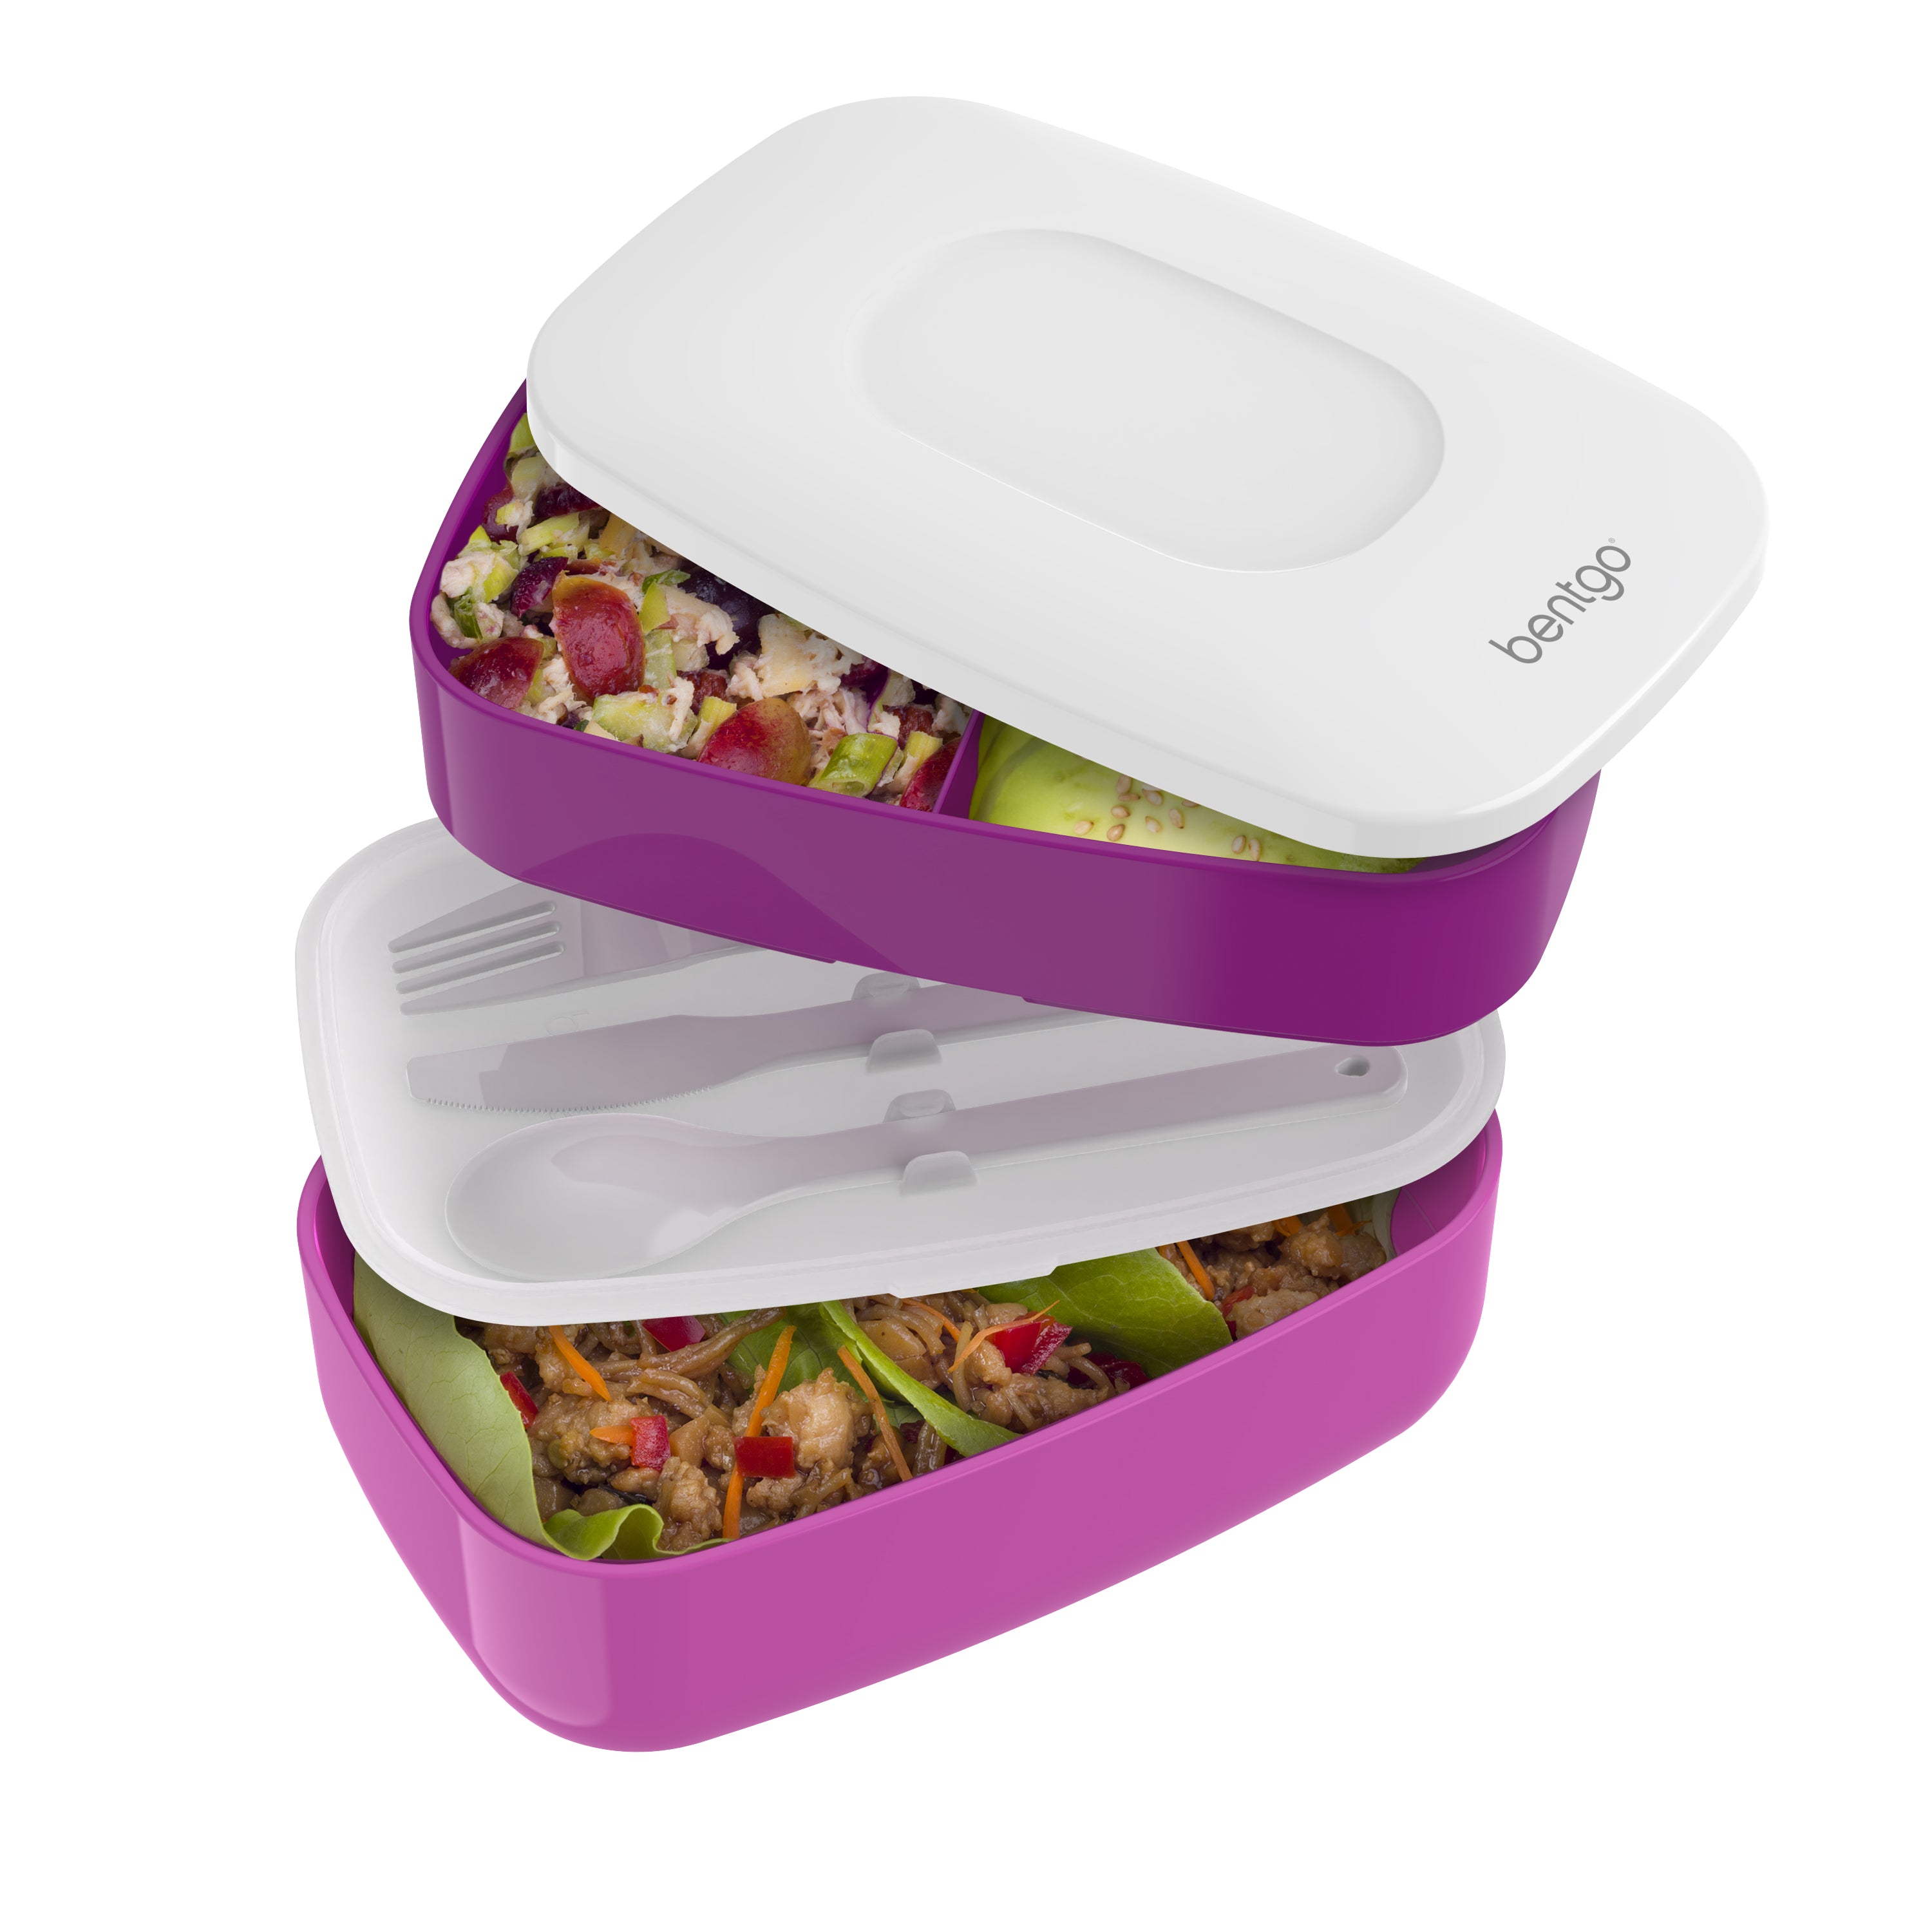 Lunch Box Ideas: 23 Ways to Upgrade With Chic Tupperware and More